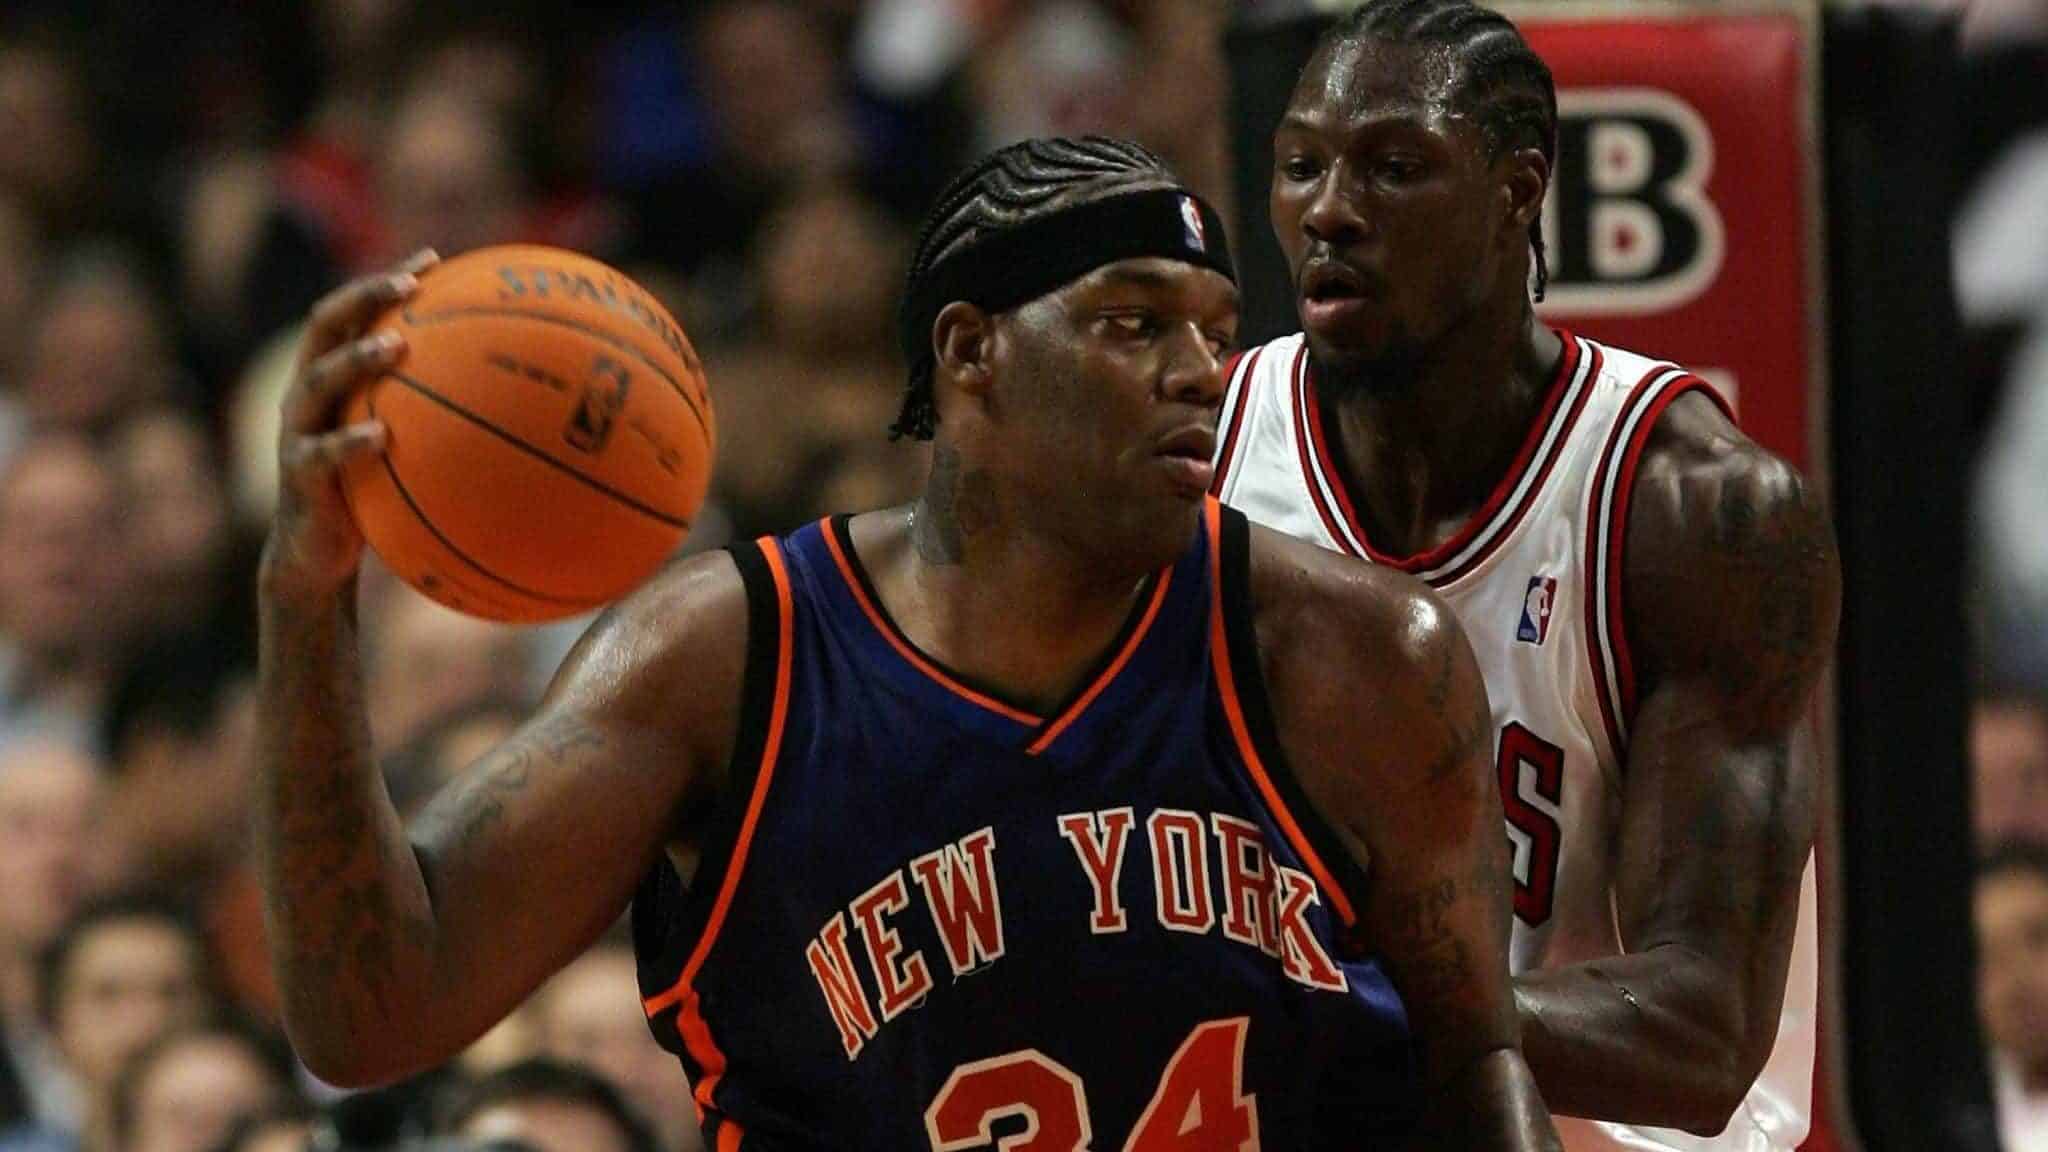 CHICAGO - NOVEMBER 28: Eddy Curry #34 of the New York Knicks looks to move the ball in the post against Ben Wallace #3 of the Chicago Bulls November 28, 2006 at the United Center in Chicago, Illinois. The Bulls won 102-85.